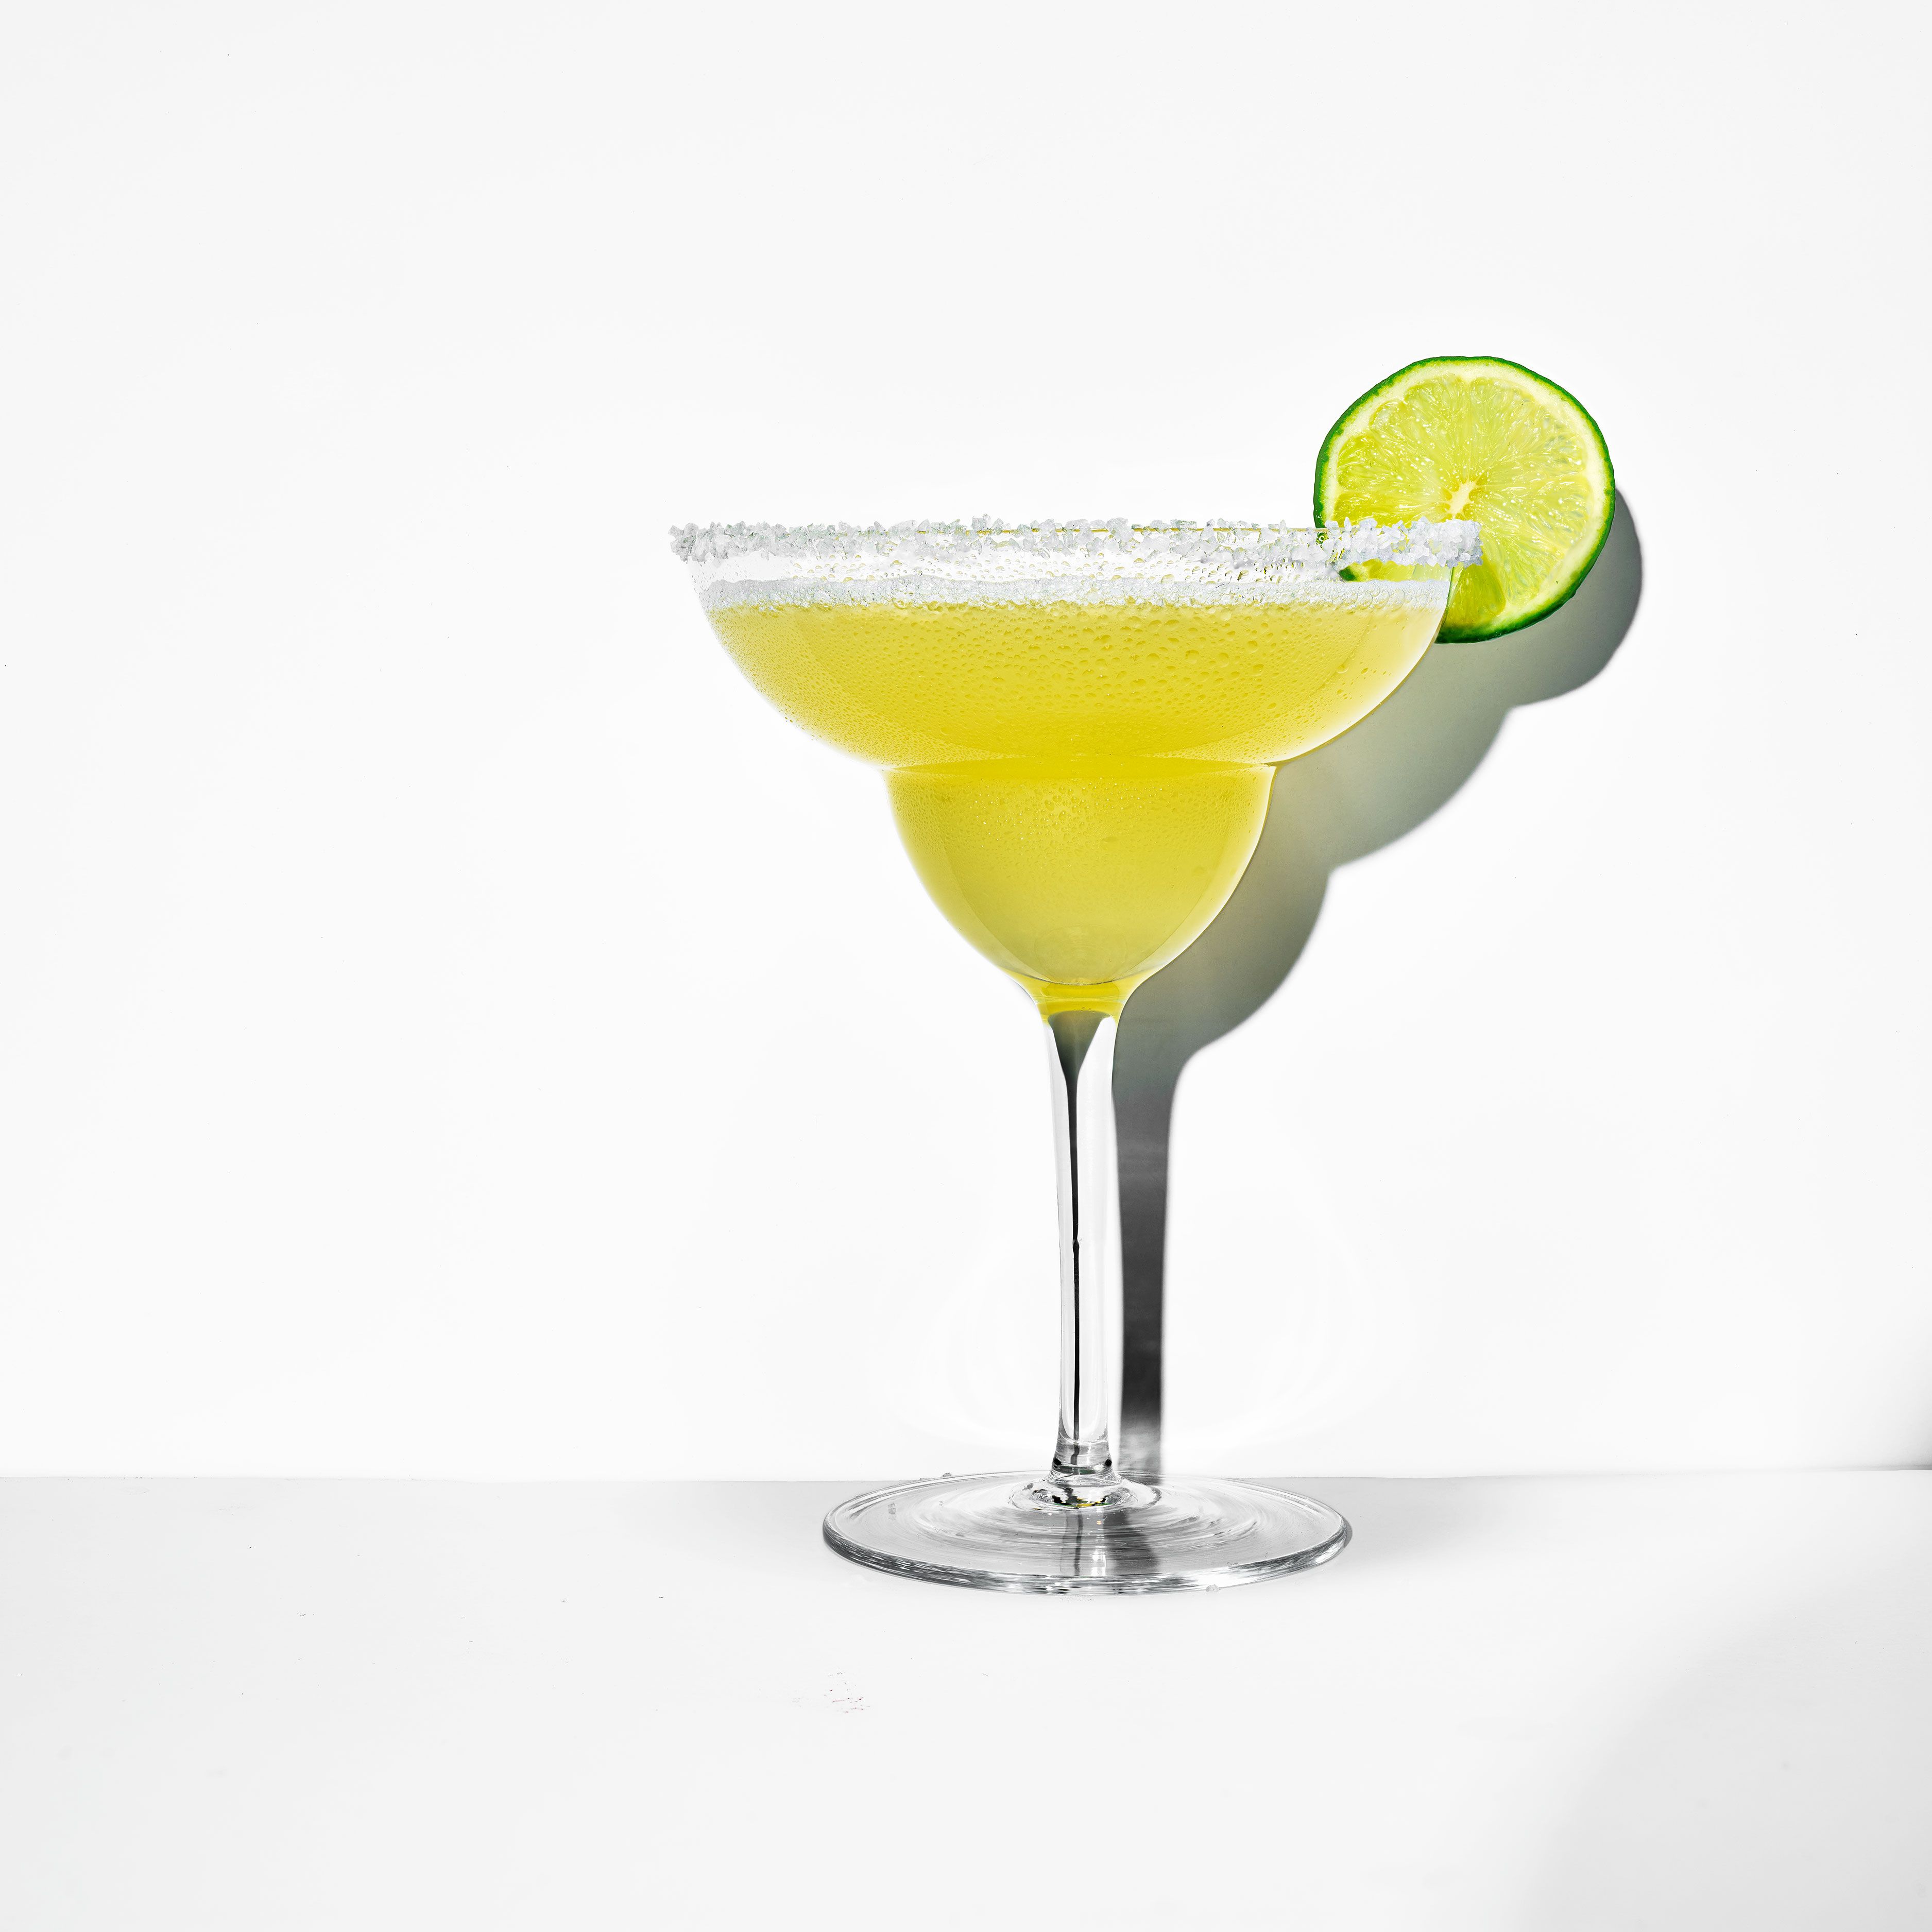 How to Make the Perfect Margarita - Tips, Ingredients